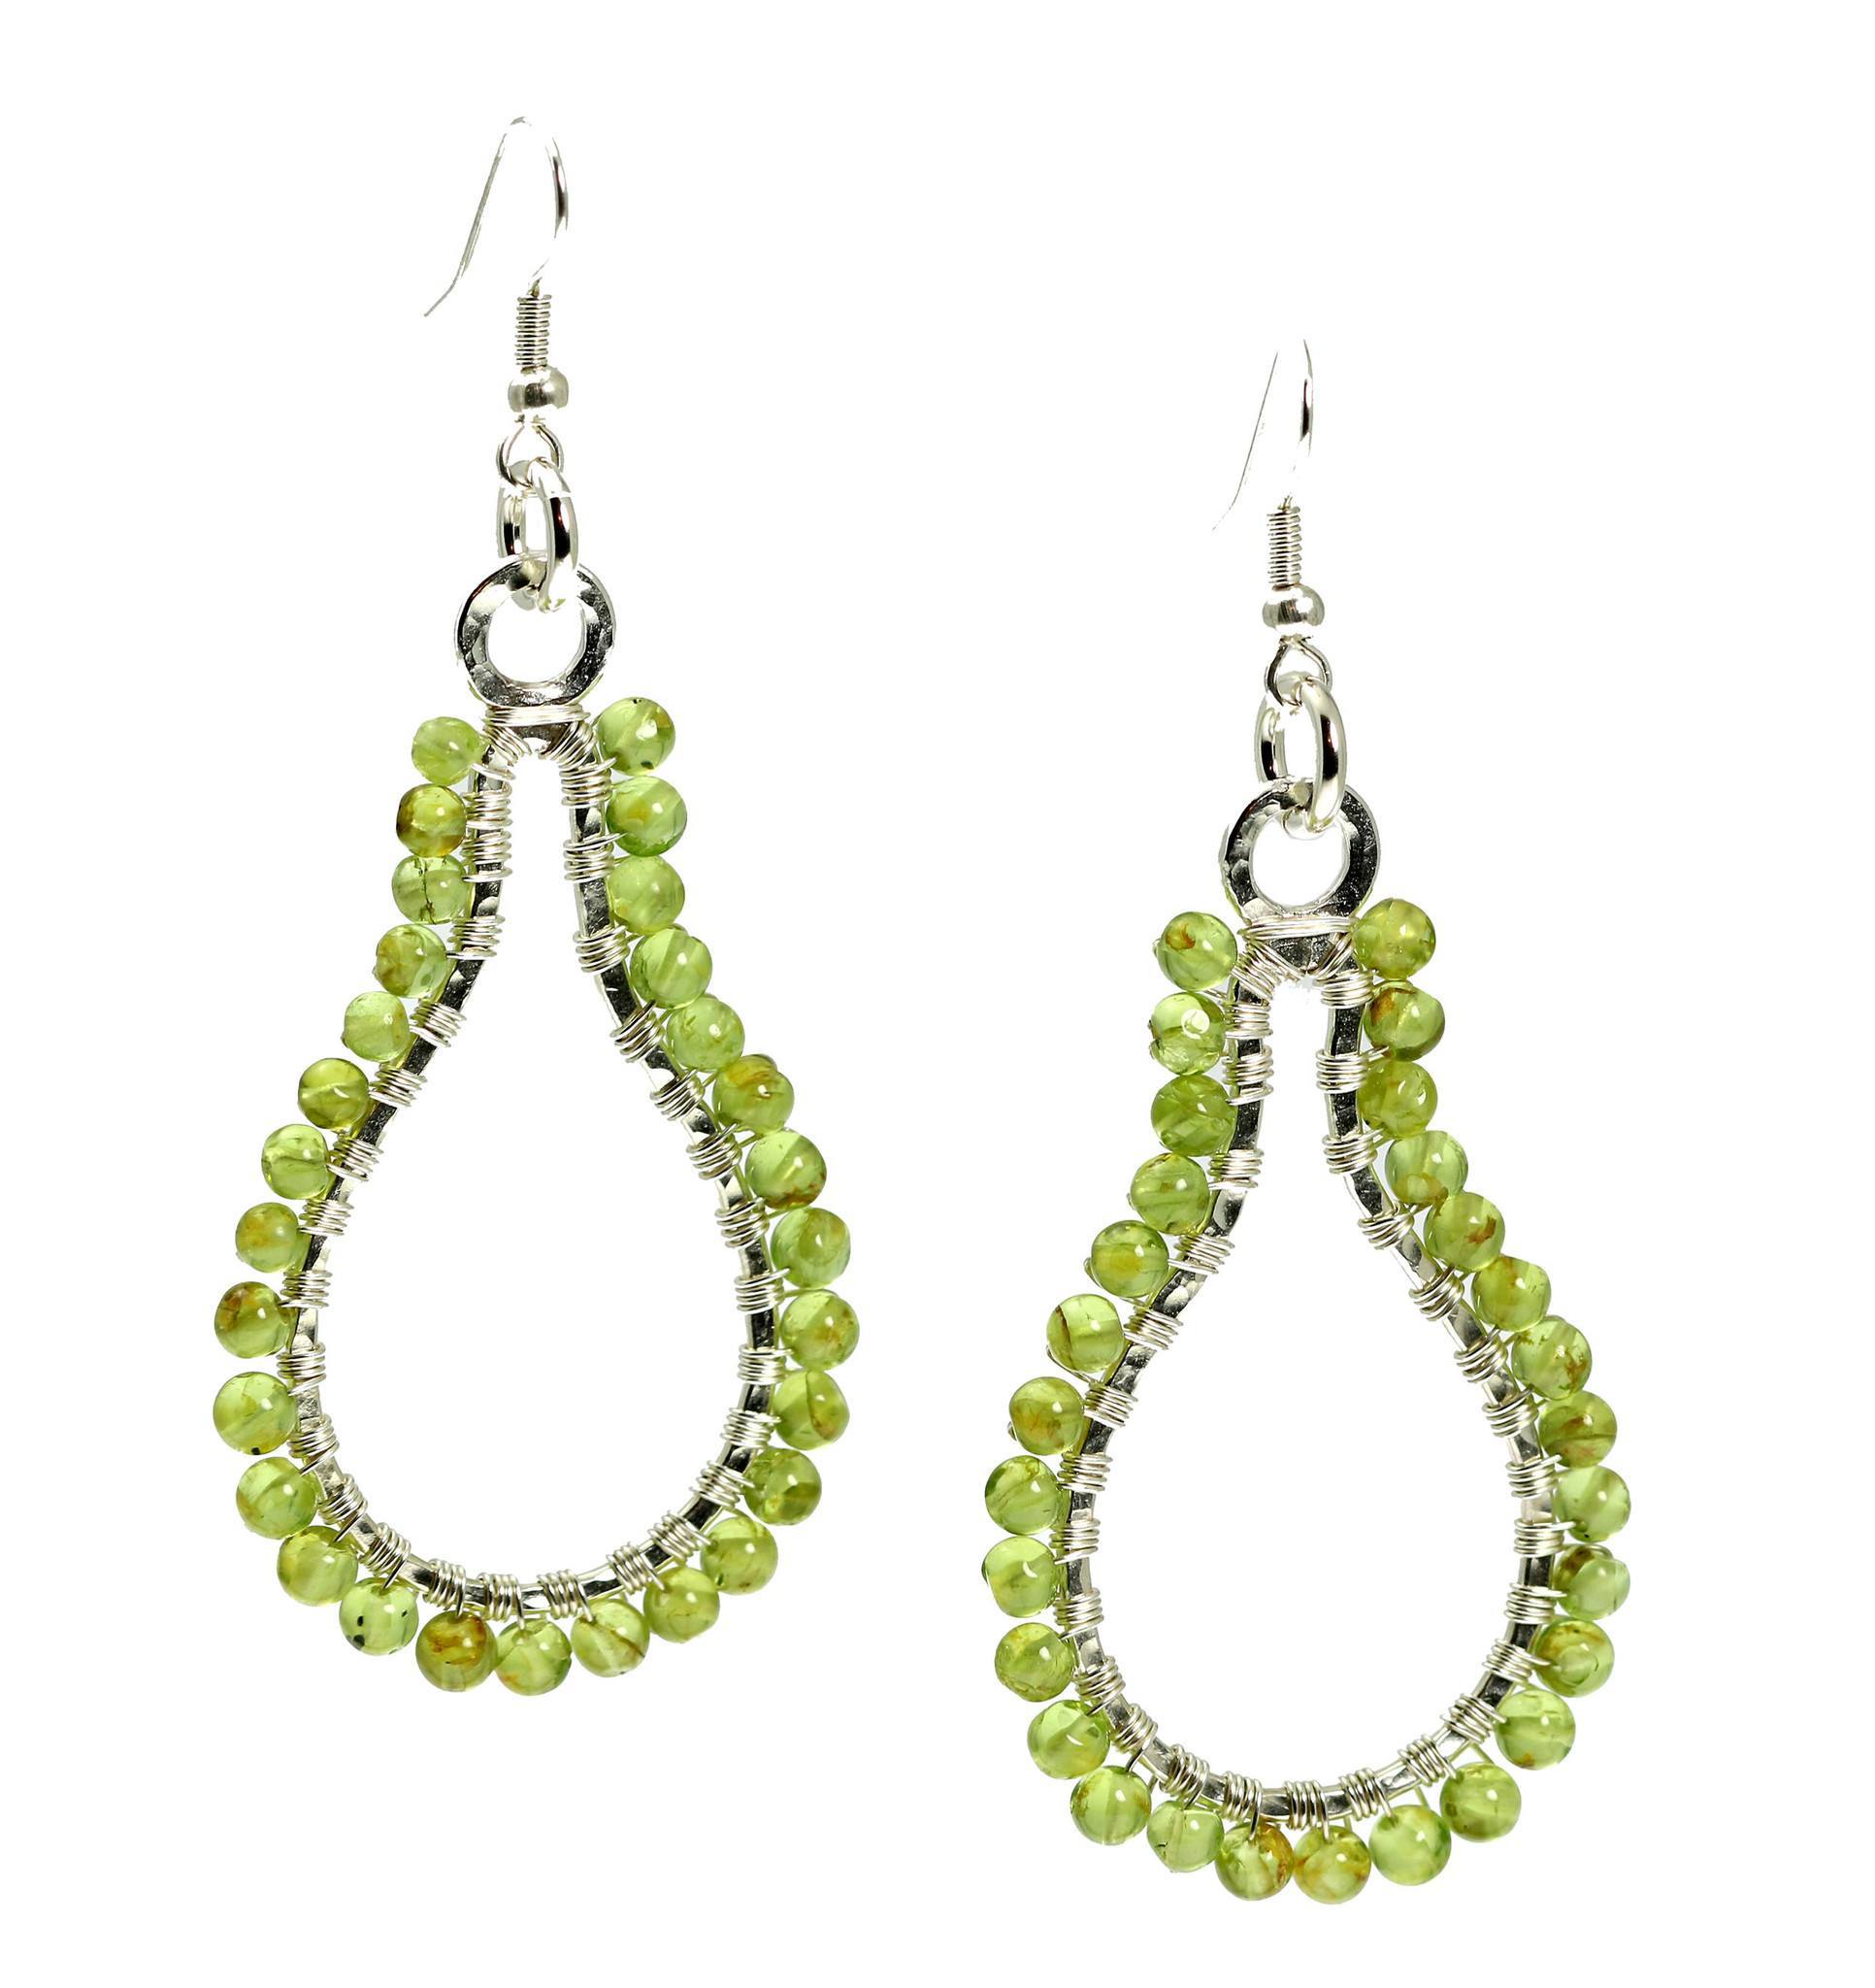 Hammered Silver Drop Earrings with Peridot